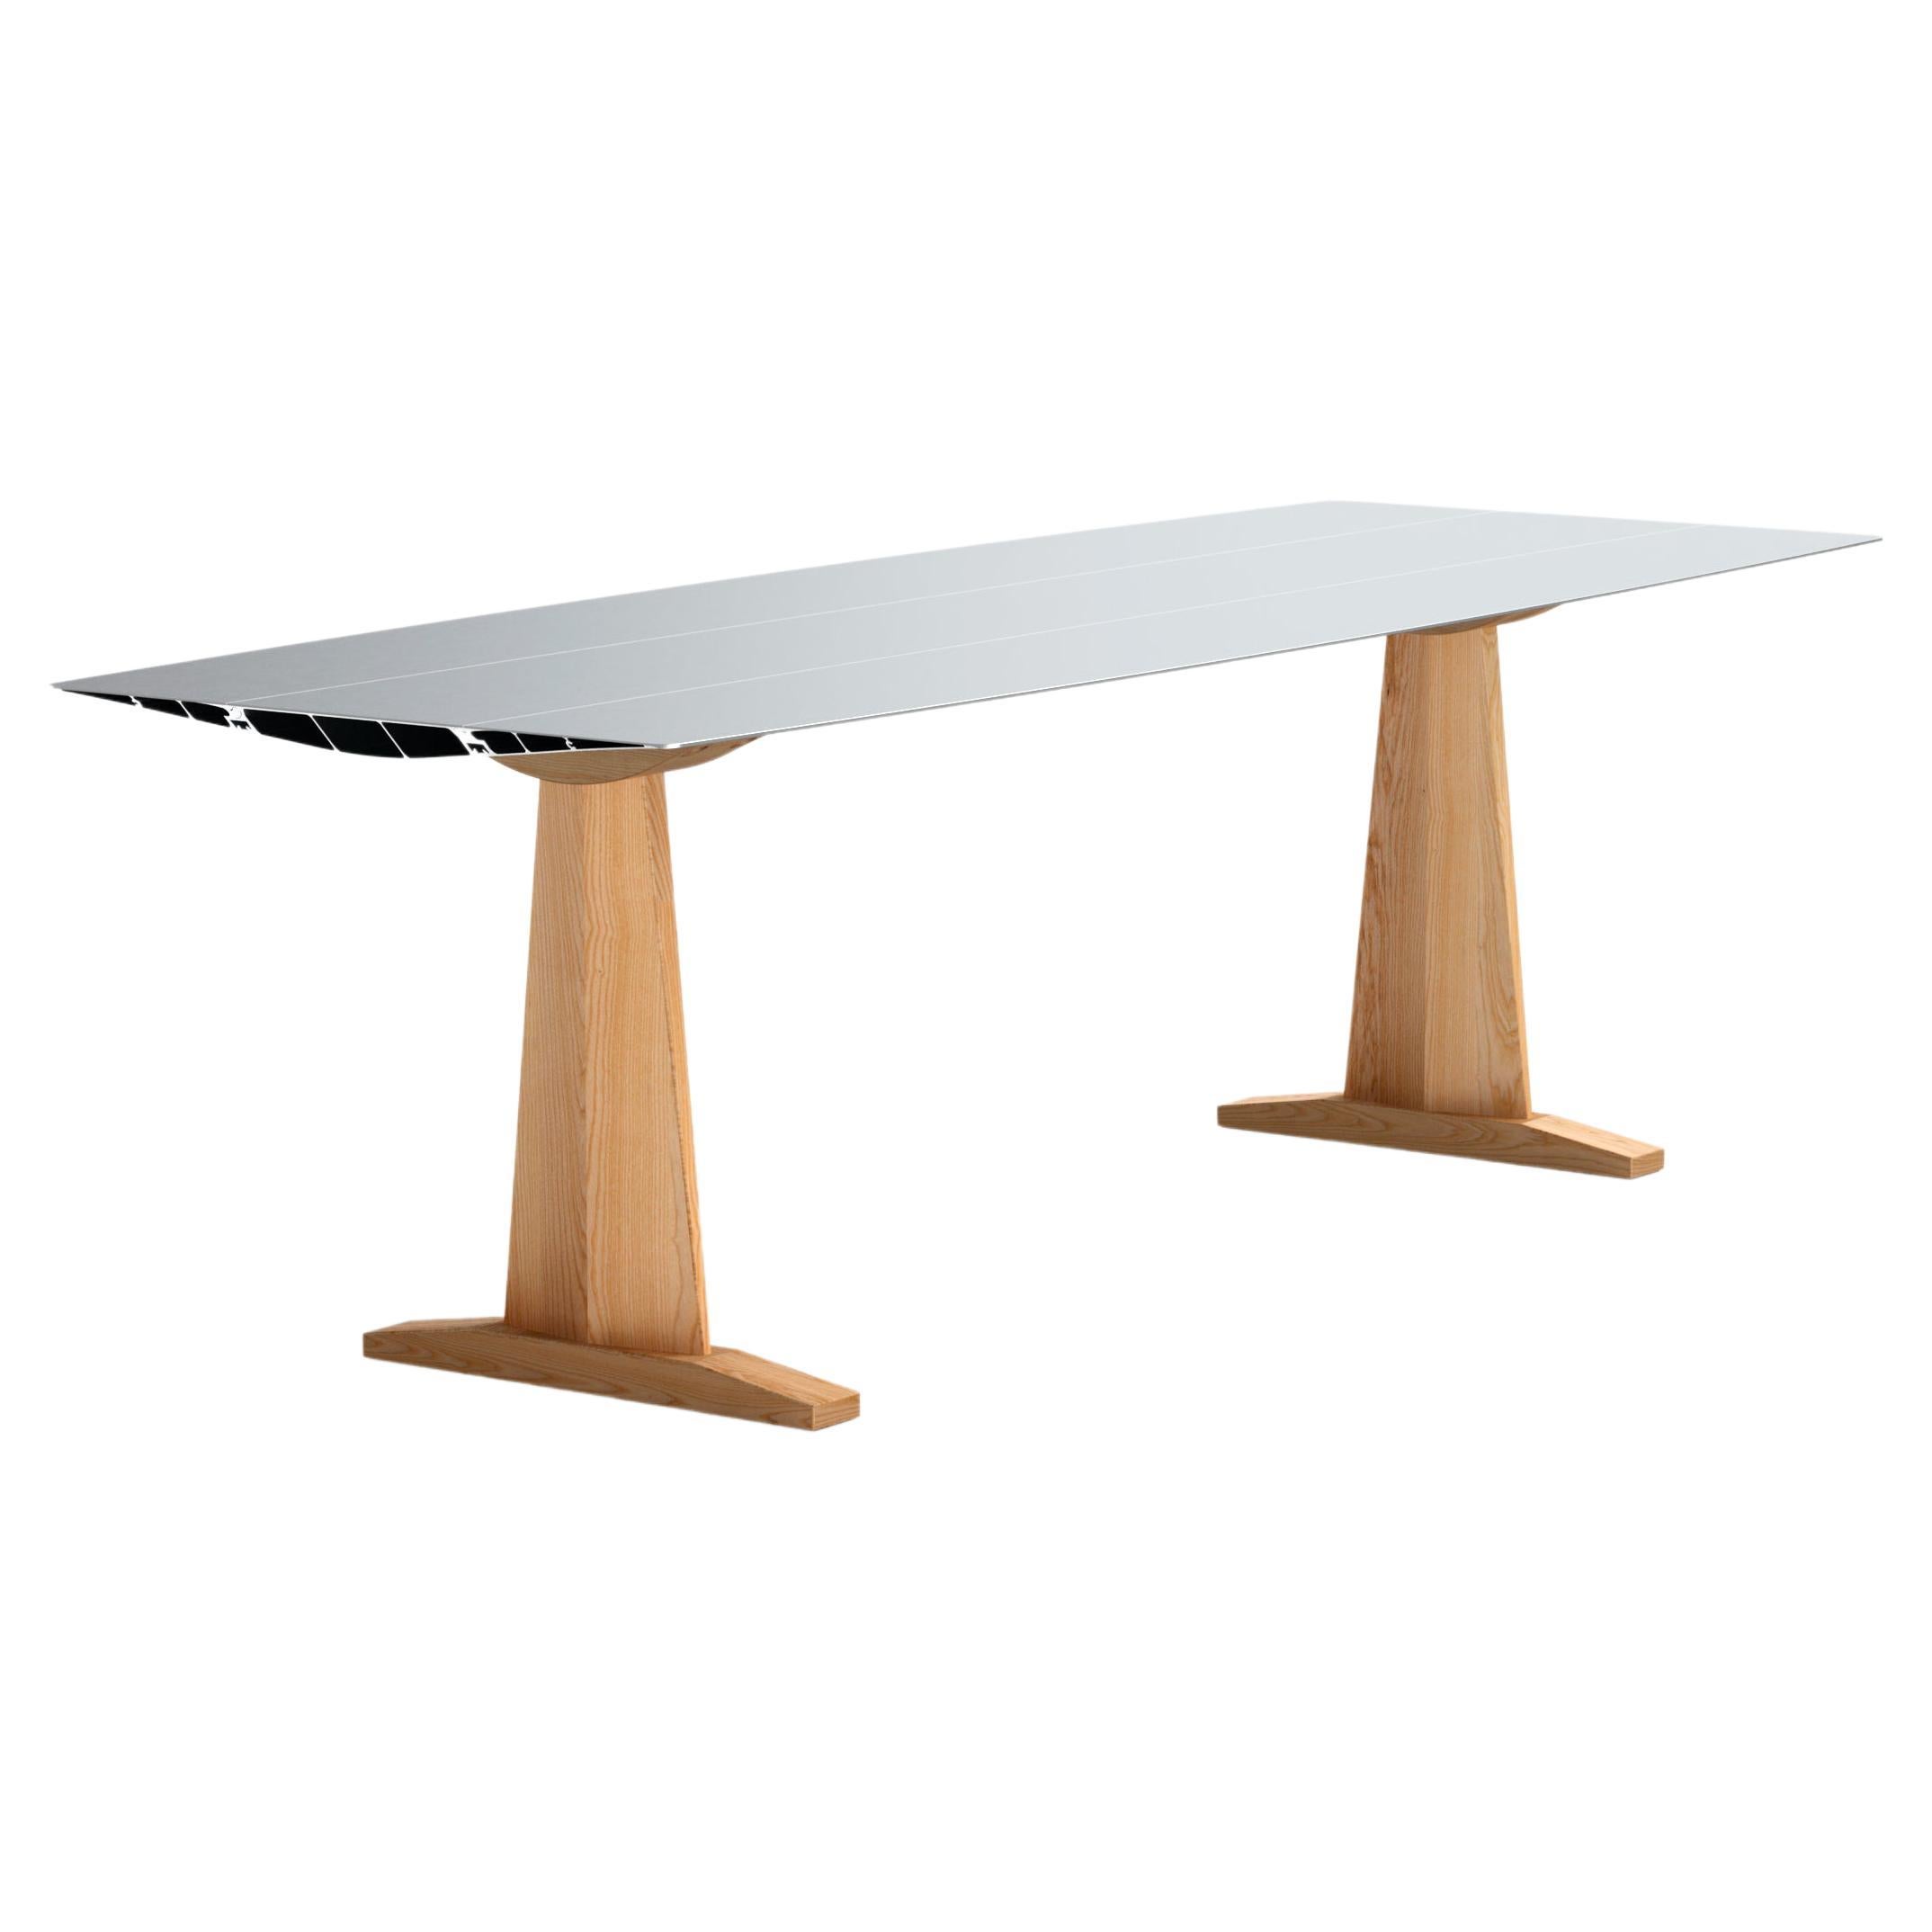 Dinning Table B90cm Konstantin Grcic Anodized Silver Top With Wood Trestle Legs